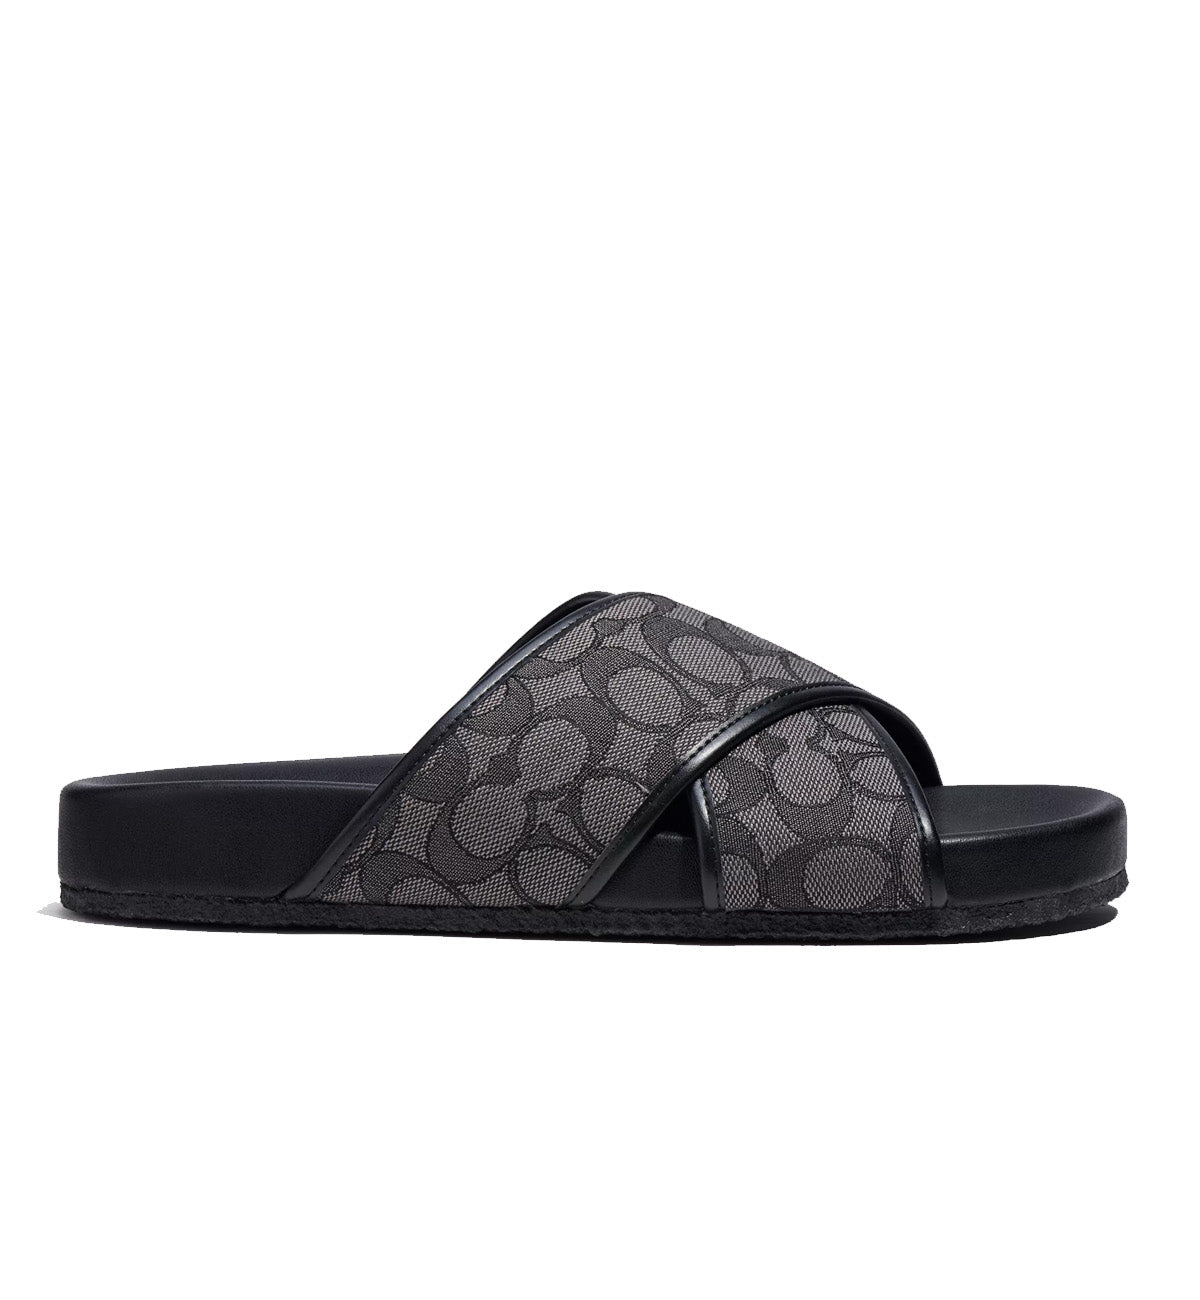 Coach Crossover Sandal